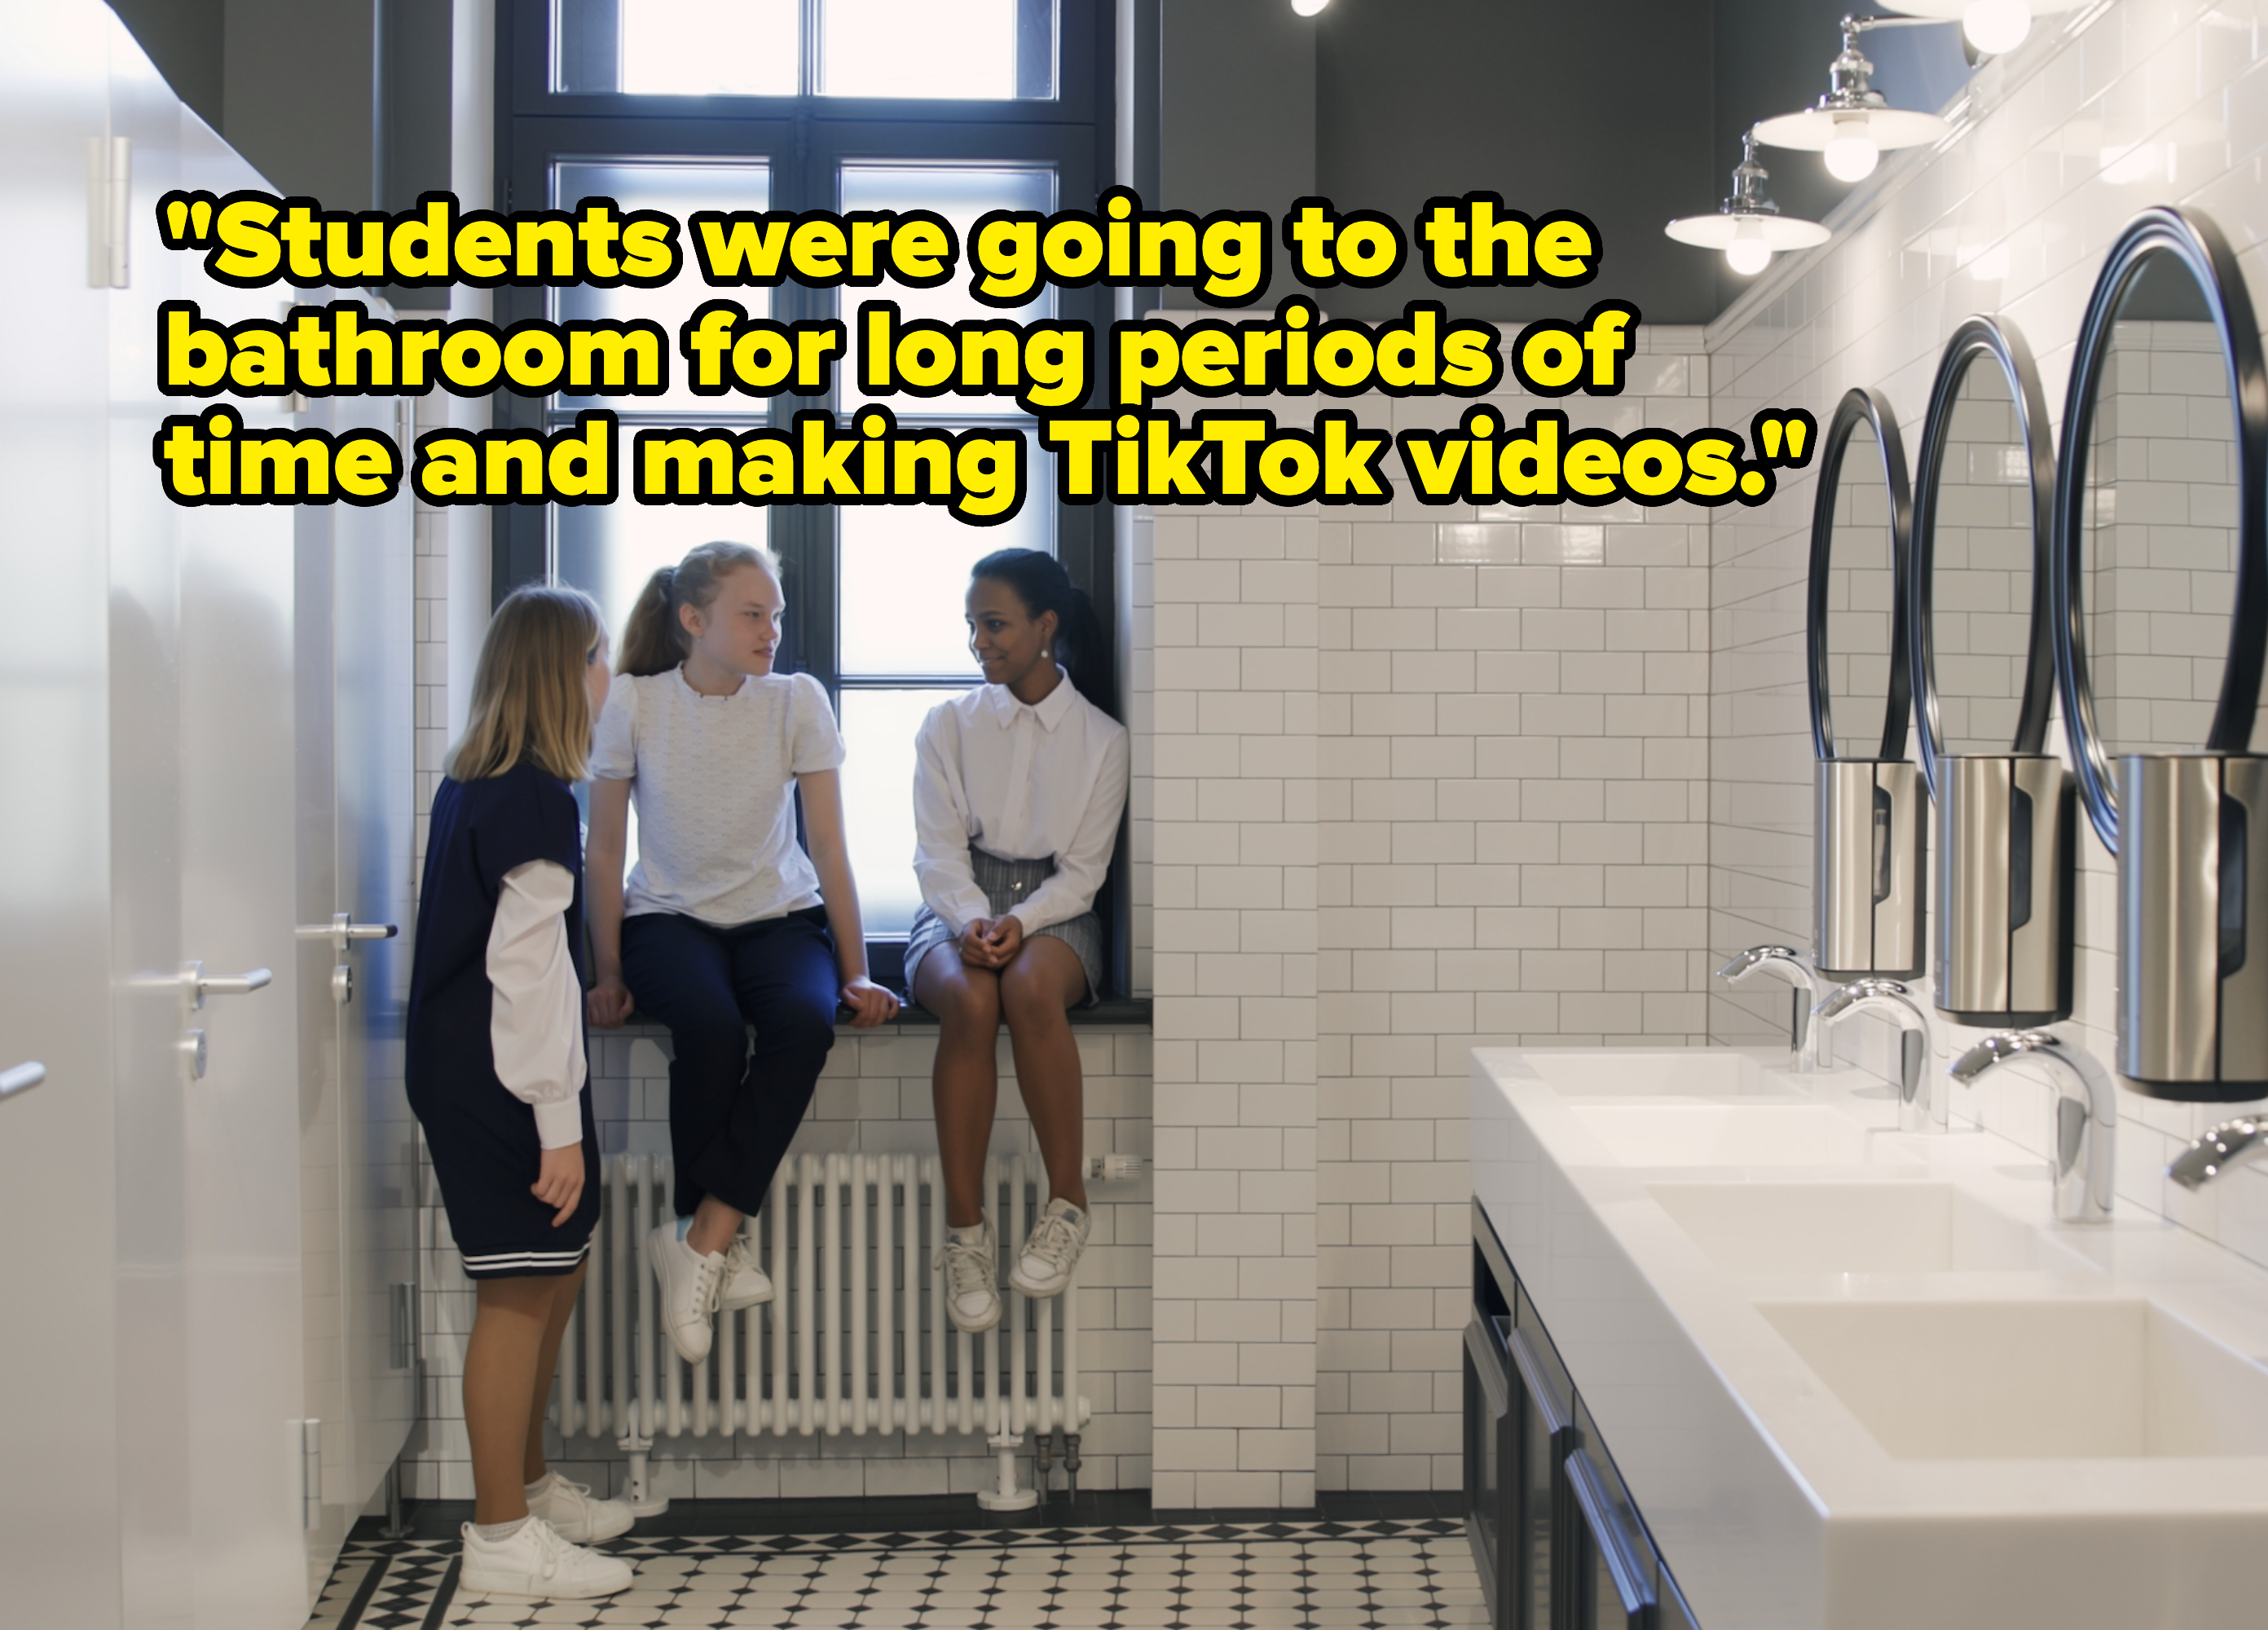 Young girls in school bathroom with caption &quot;Students were going to the bathroom for long periods of time and making TikTok videos&quot;